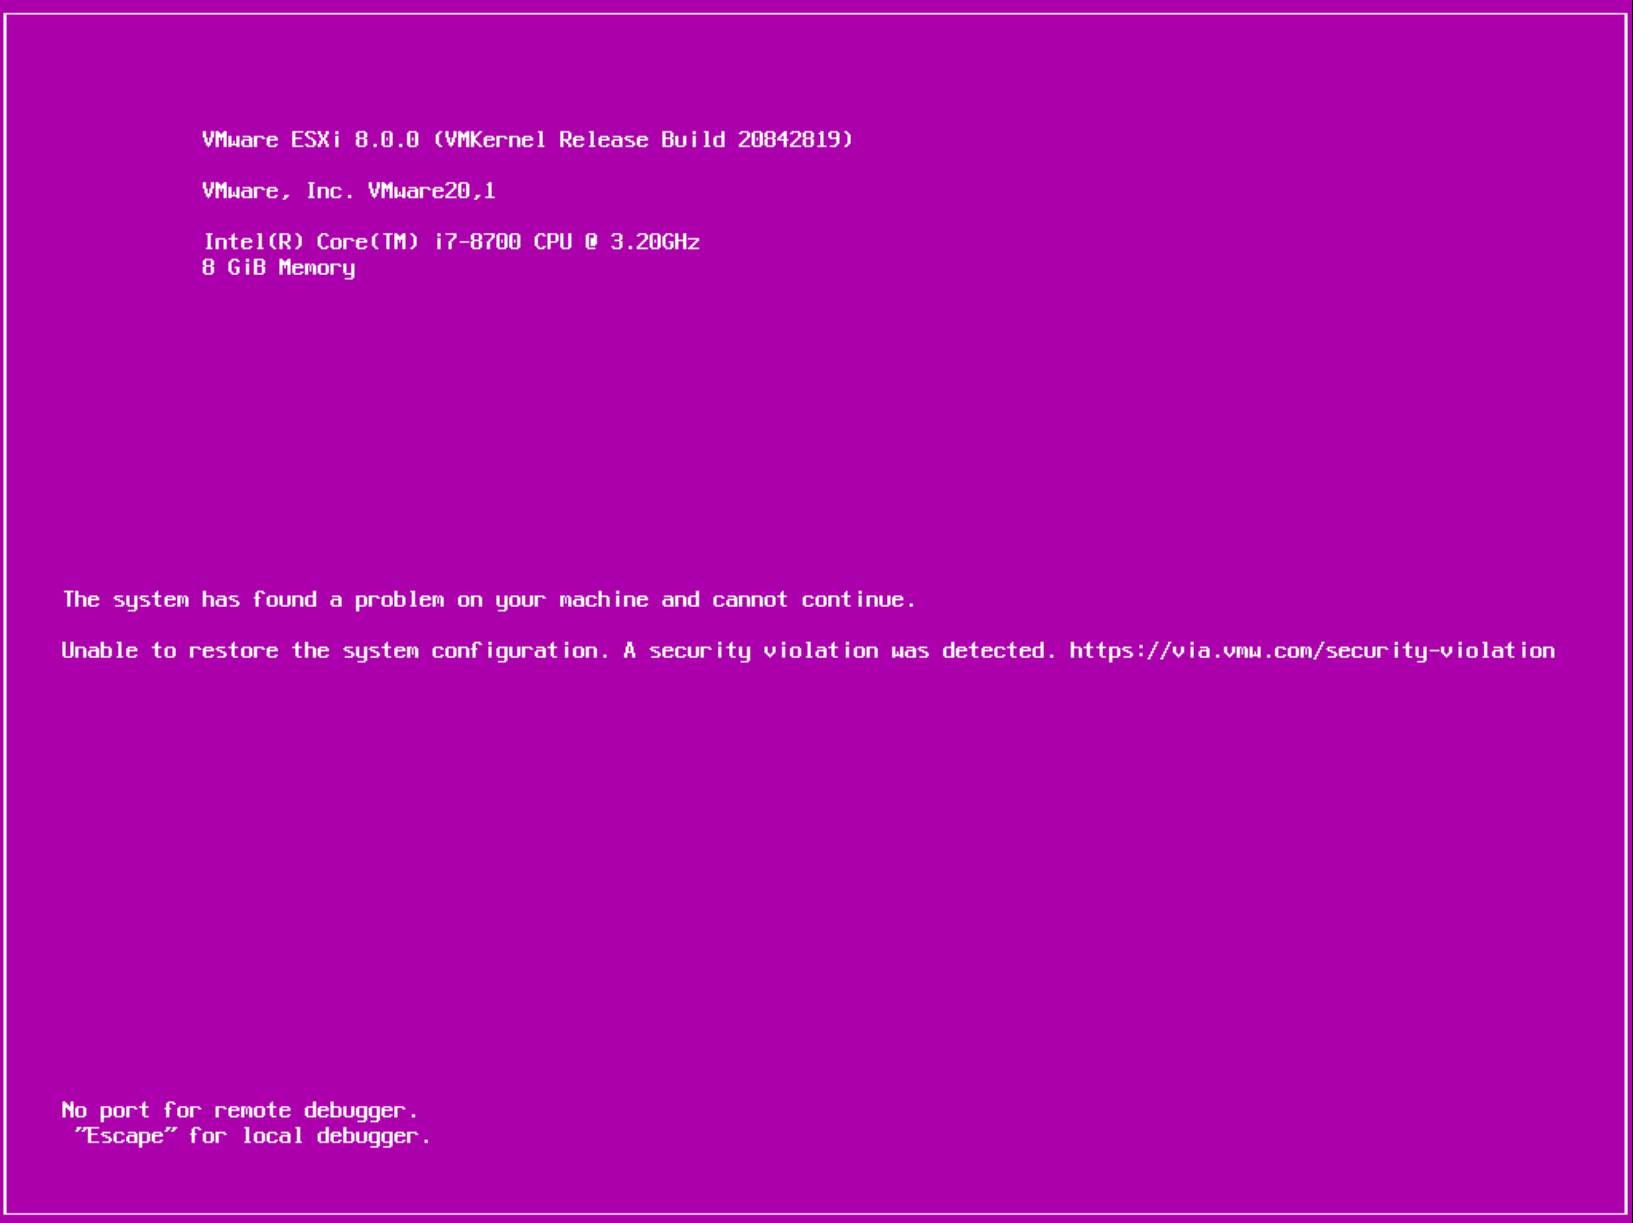 VMware ESXi 8.0 Purple Screen of Death (PSOD) that states the host is unable to restore the system configuration